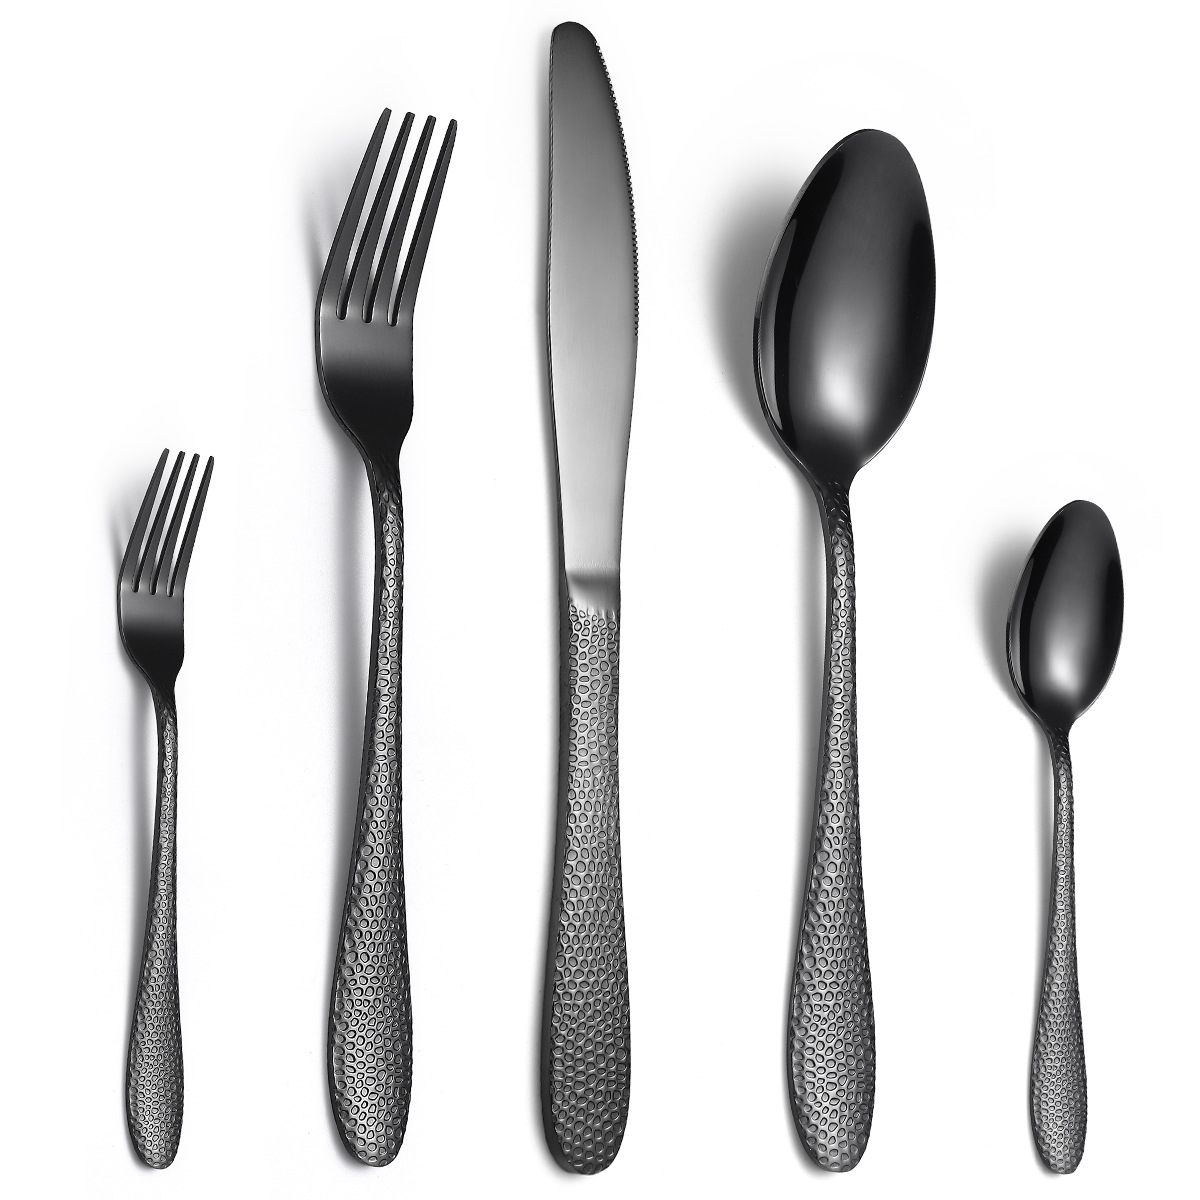 5 Pcs Piece High End Silverware Flatware Colorful Black And Gold Matte Stainless Steel Cutlery Set for Star Hotel